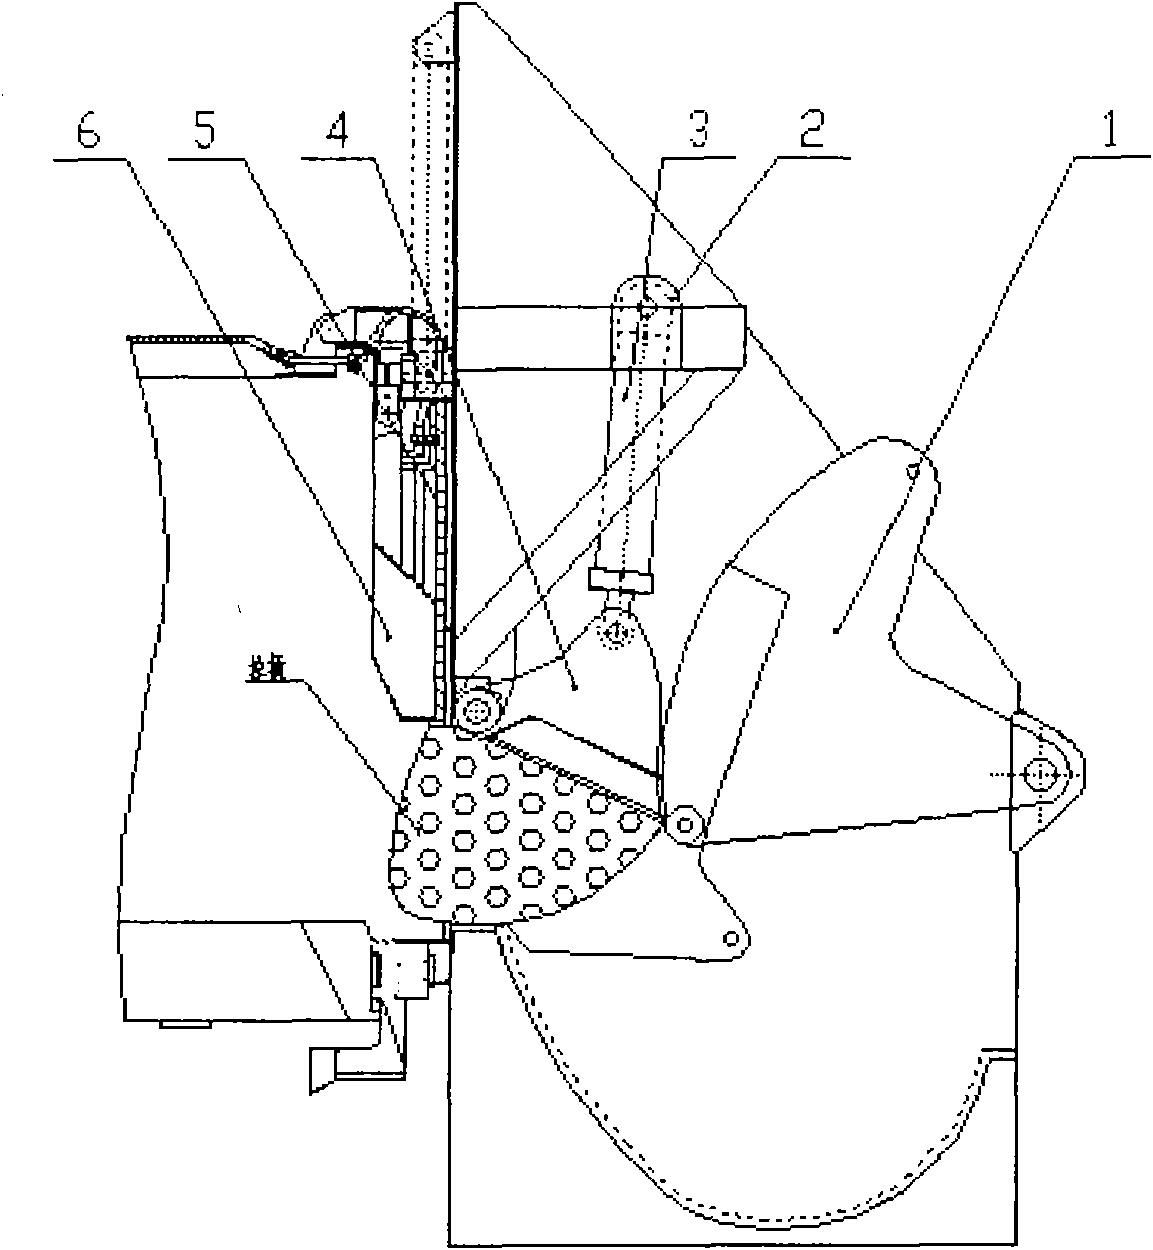 Secondary compaction device of garbage compression box